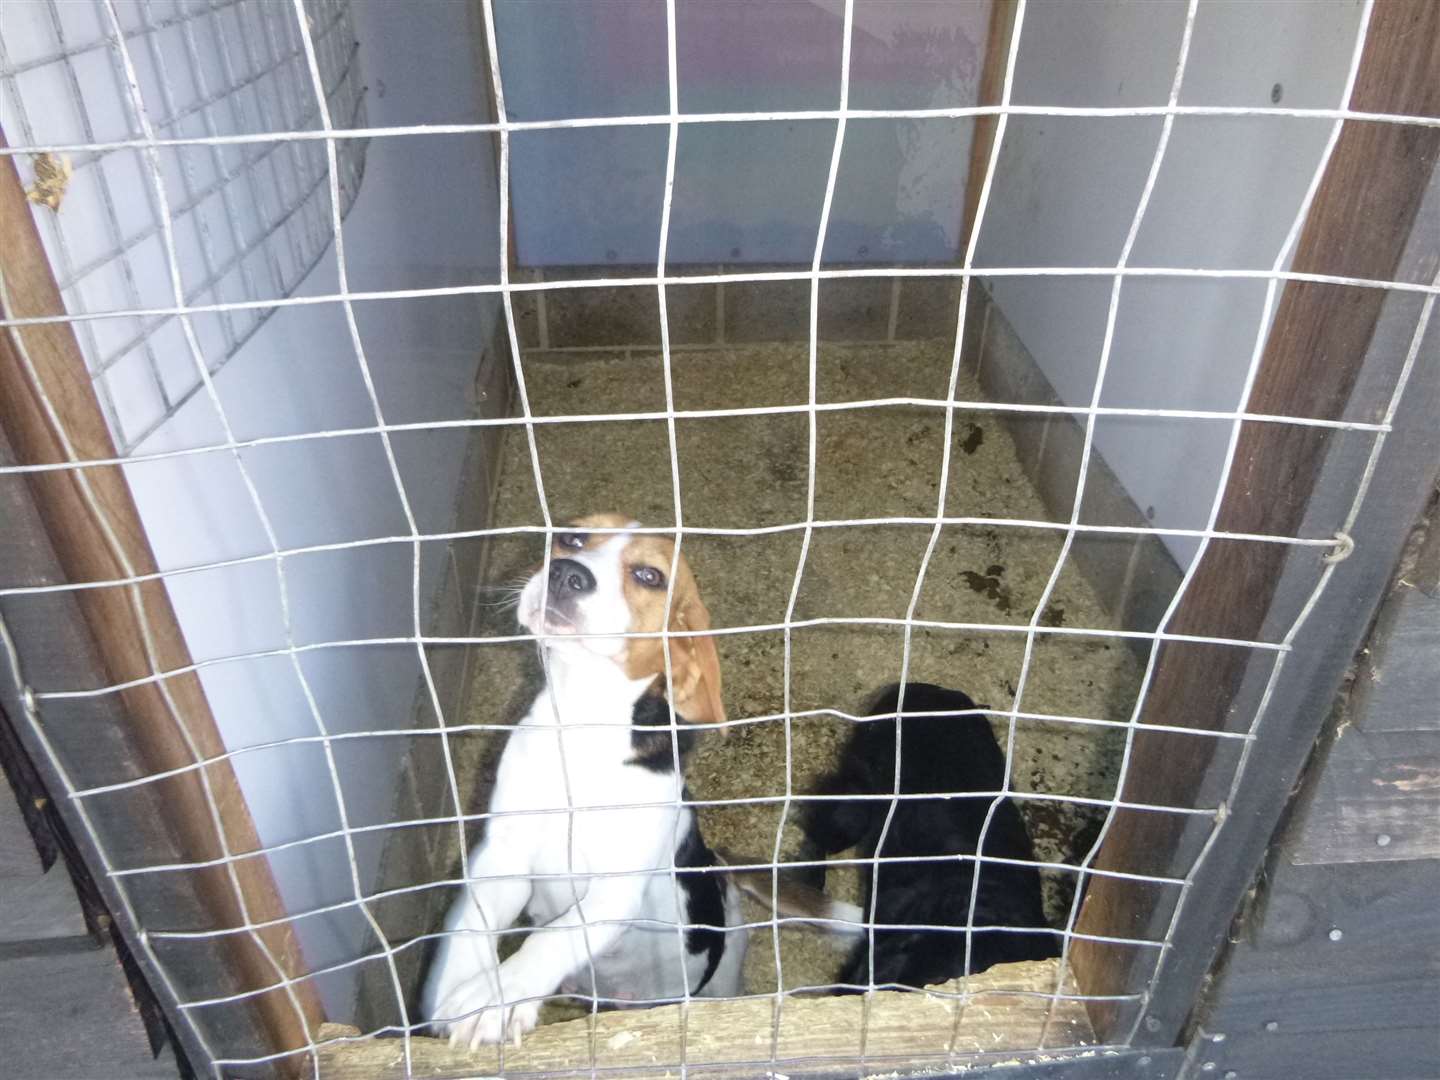 Two Kent men were handed suspended sentencing after being found breeding dogs and running a cock fighting ring in 2018. Picture: RSPCA